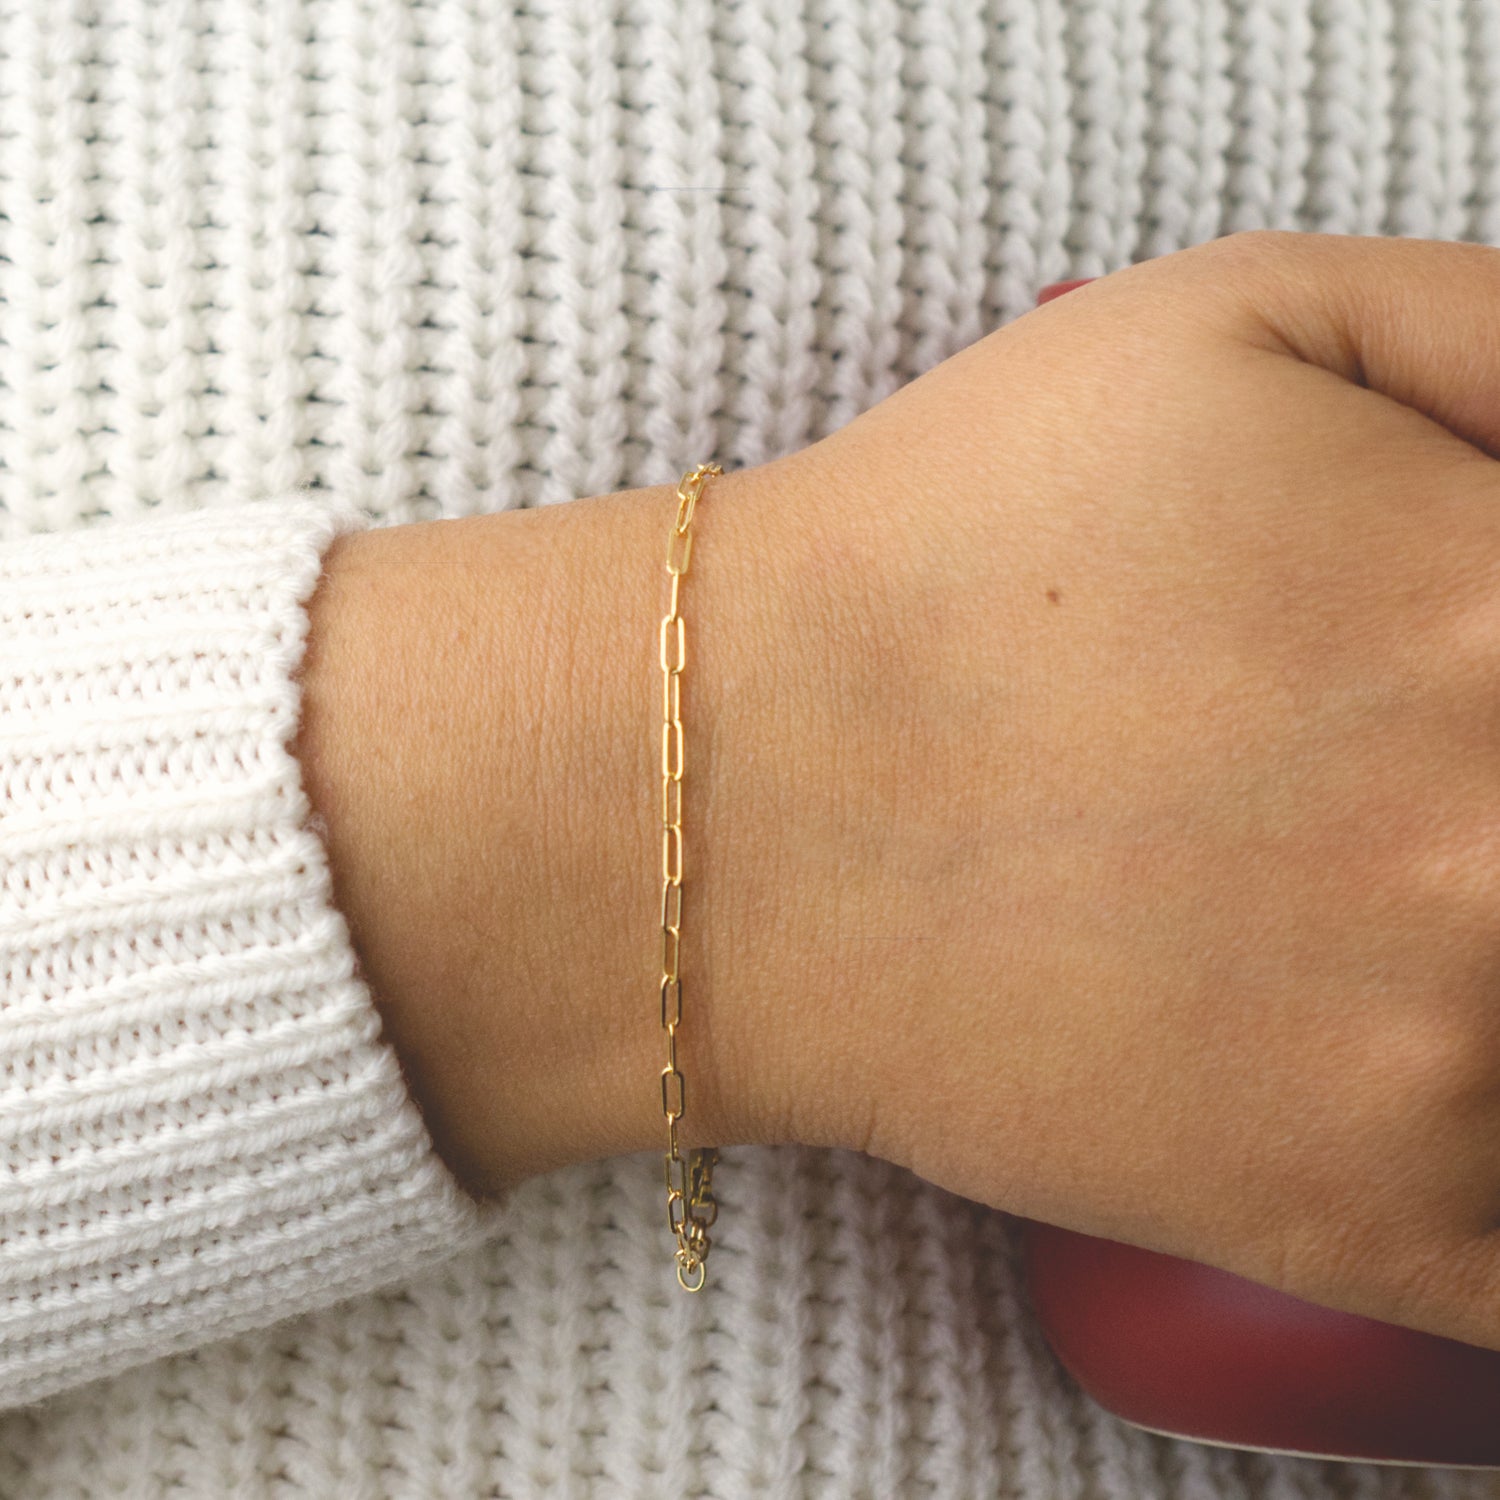 Woman wearing a 14K gold fill paperclip chain bracelet with a minimalist style (small) link size